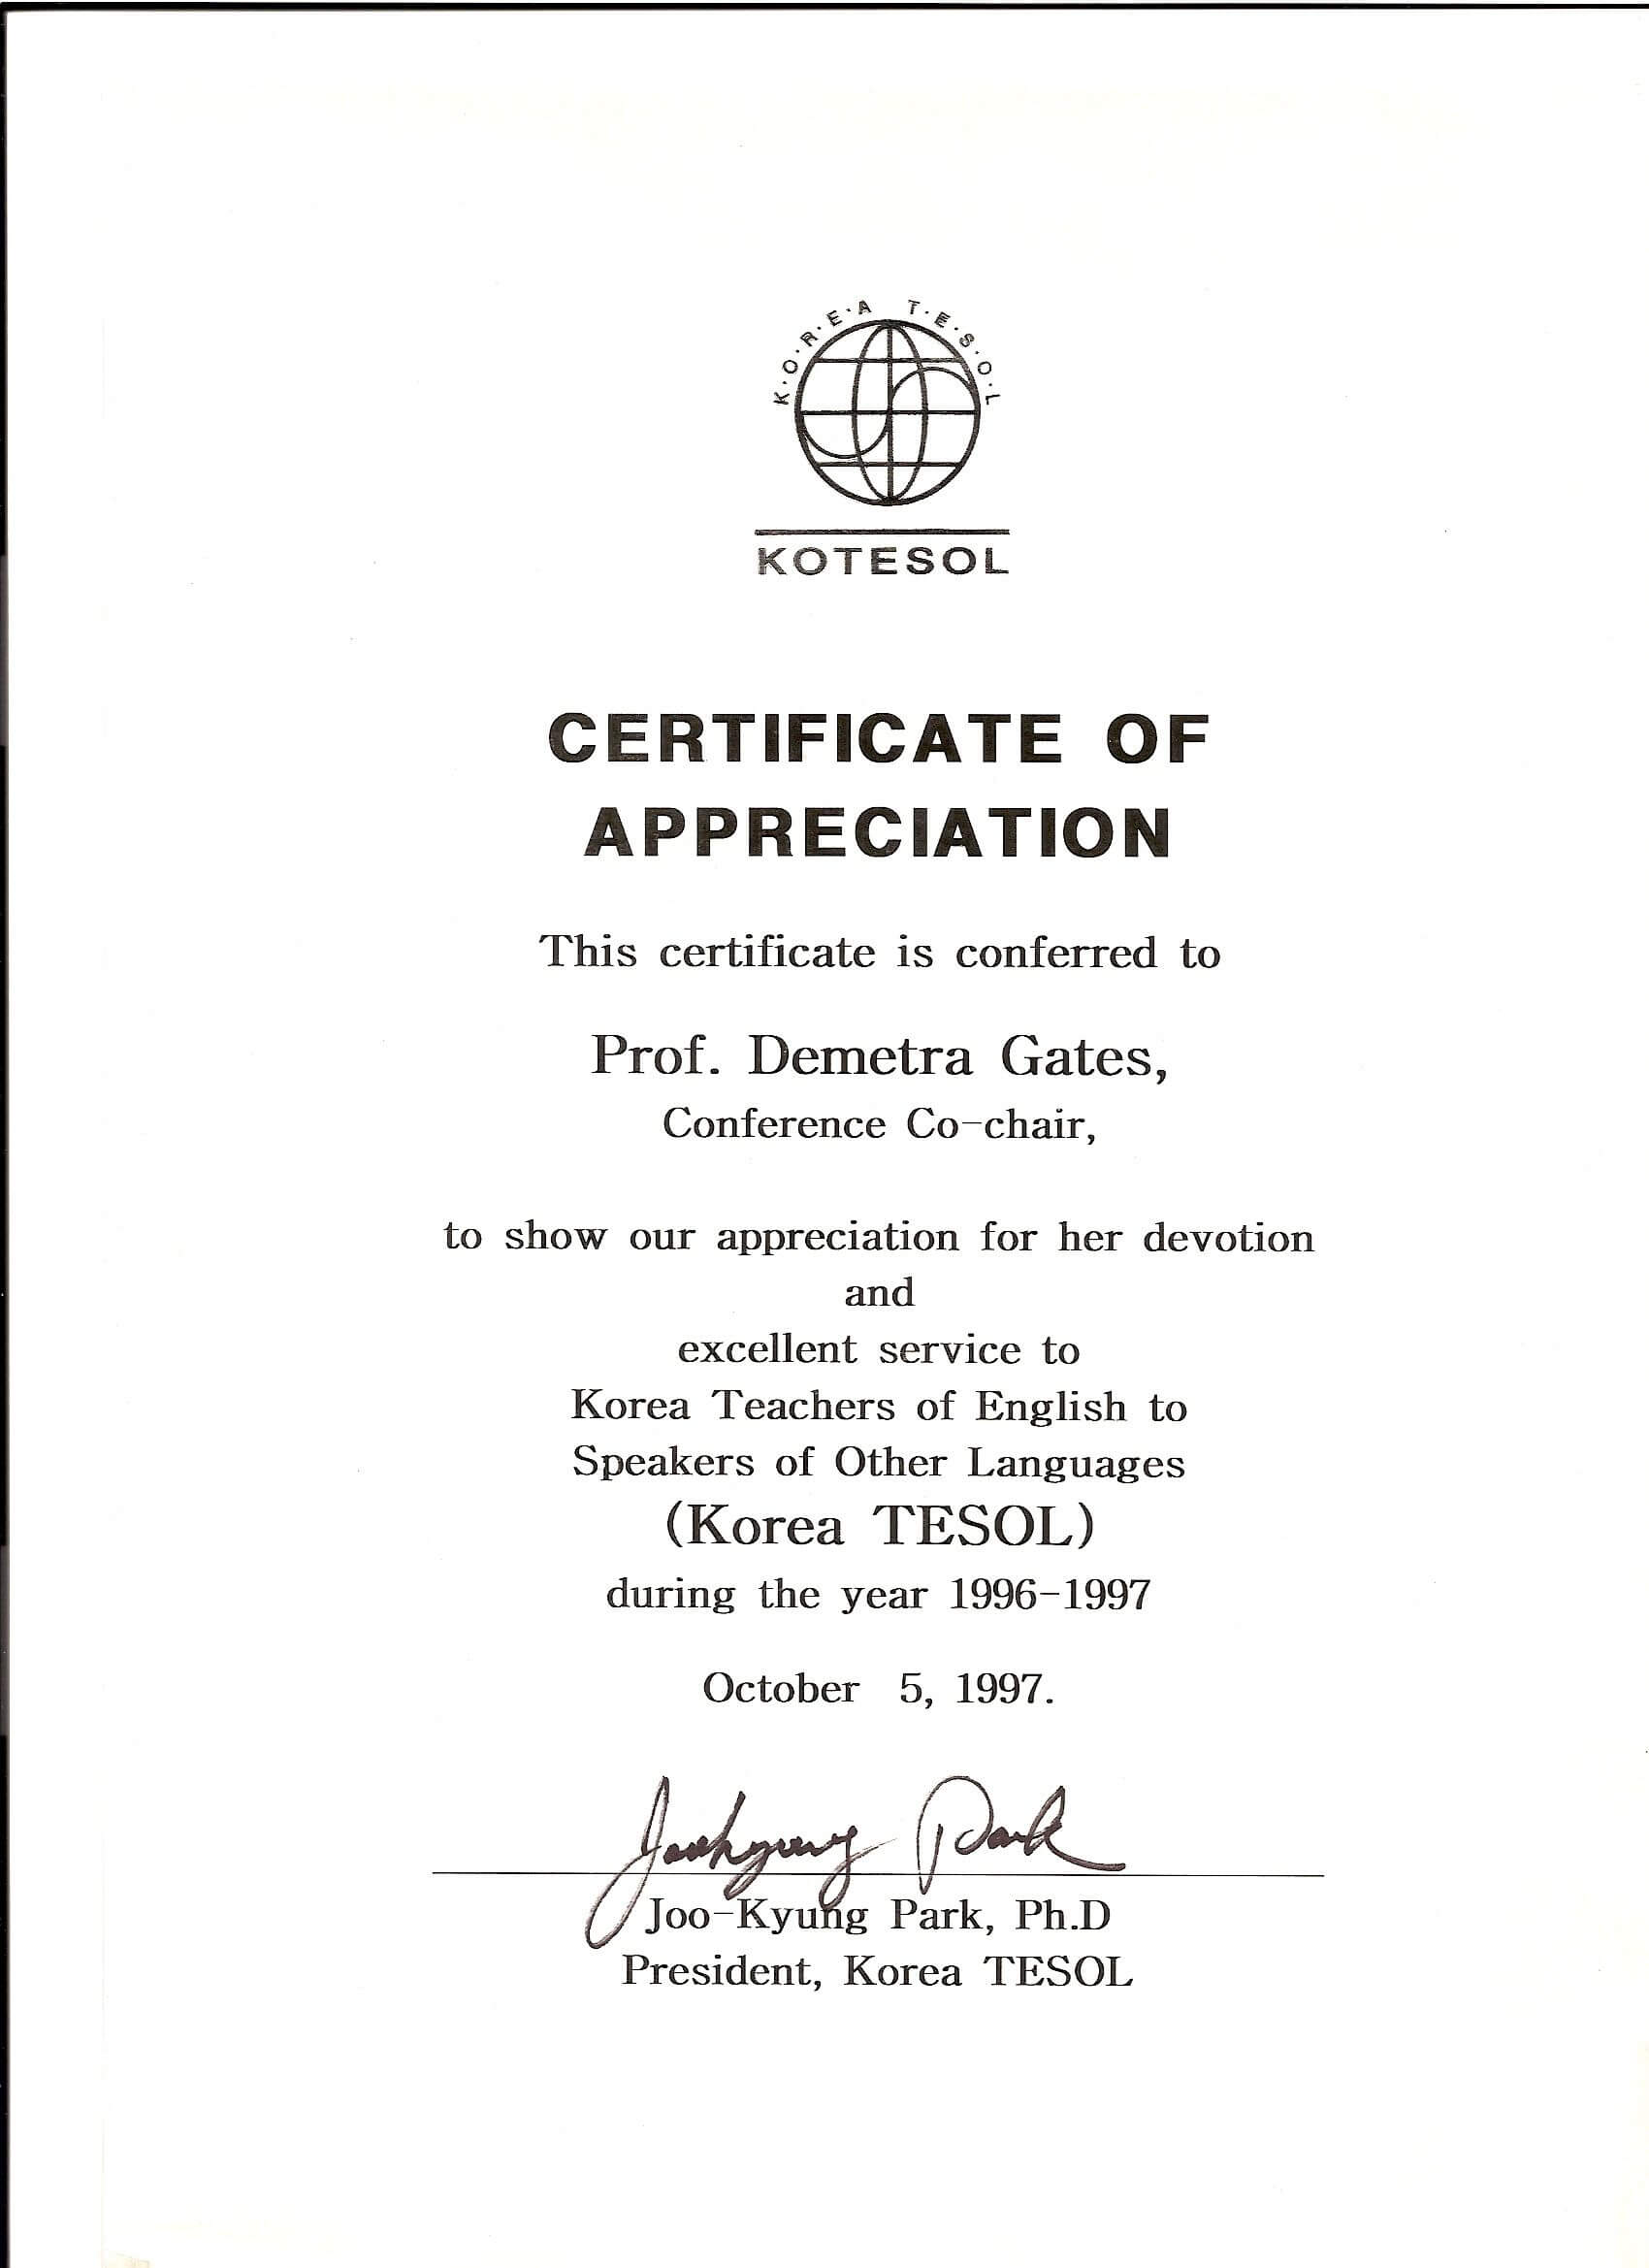 Kotesol Presidential Certificate Of Appreciation (1997 Throughout Certificate For Years Of Service Template